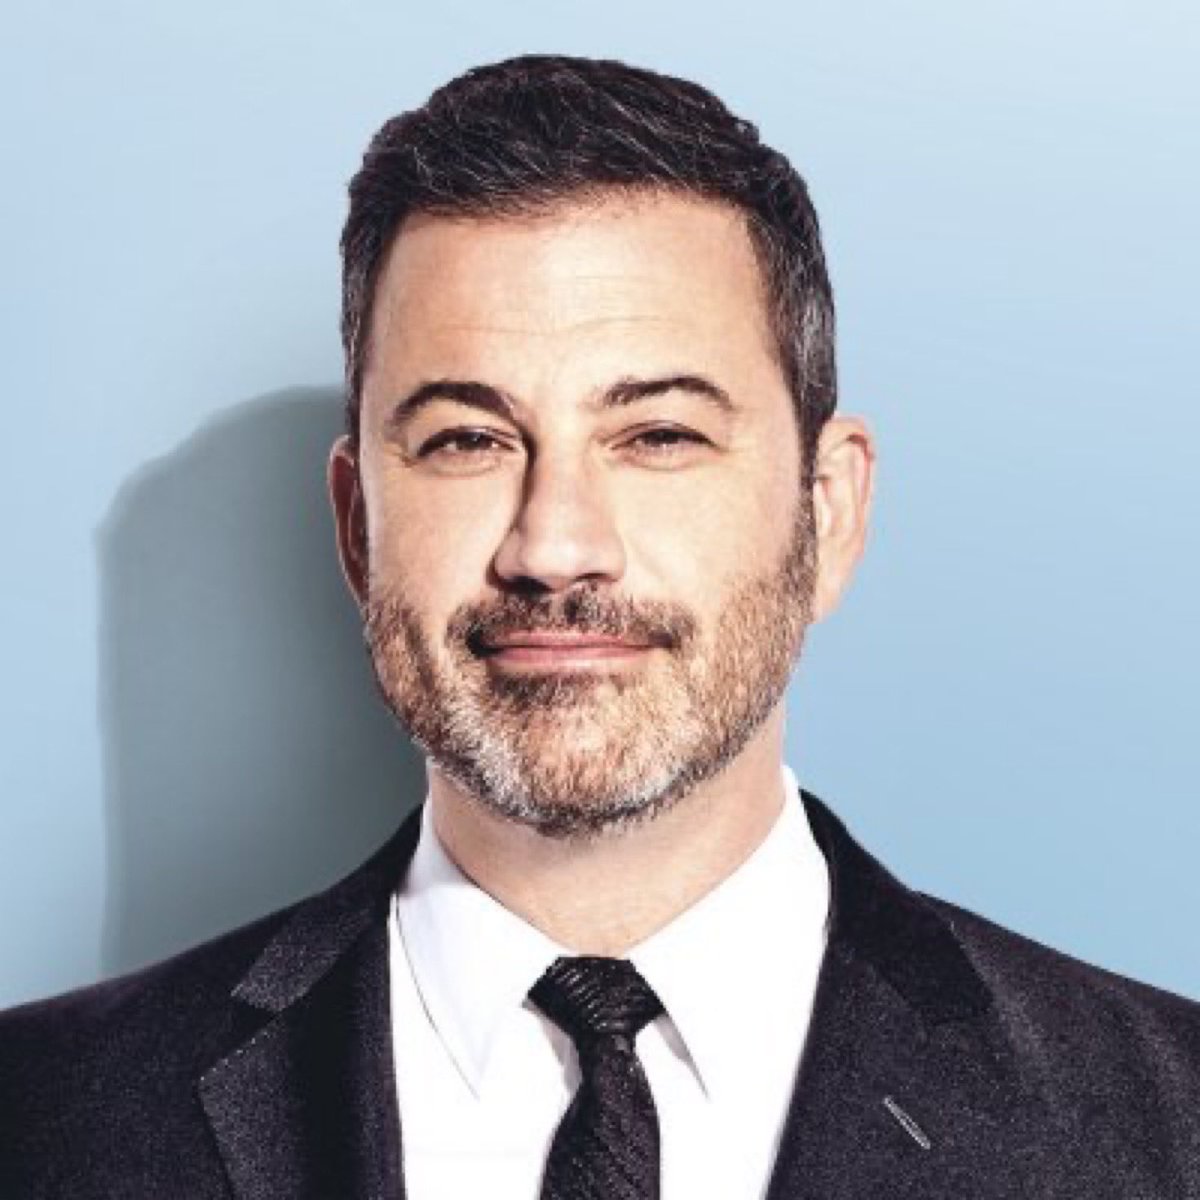 Don’t worry Jimmy, MAGA calls EVERYONE that doesn’t support Trump, the BIGGEST pedophile, sexual abuser, rapist in the world, a peedo. 
I LOVE Jimmy Kimmel, and watch his show every night, what about YOU, do you think he should sue the pants off Aaron Rodgers?